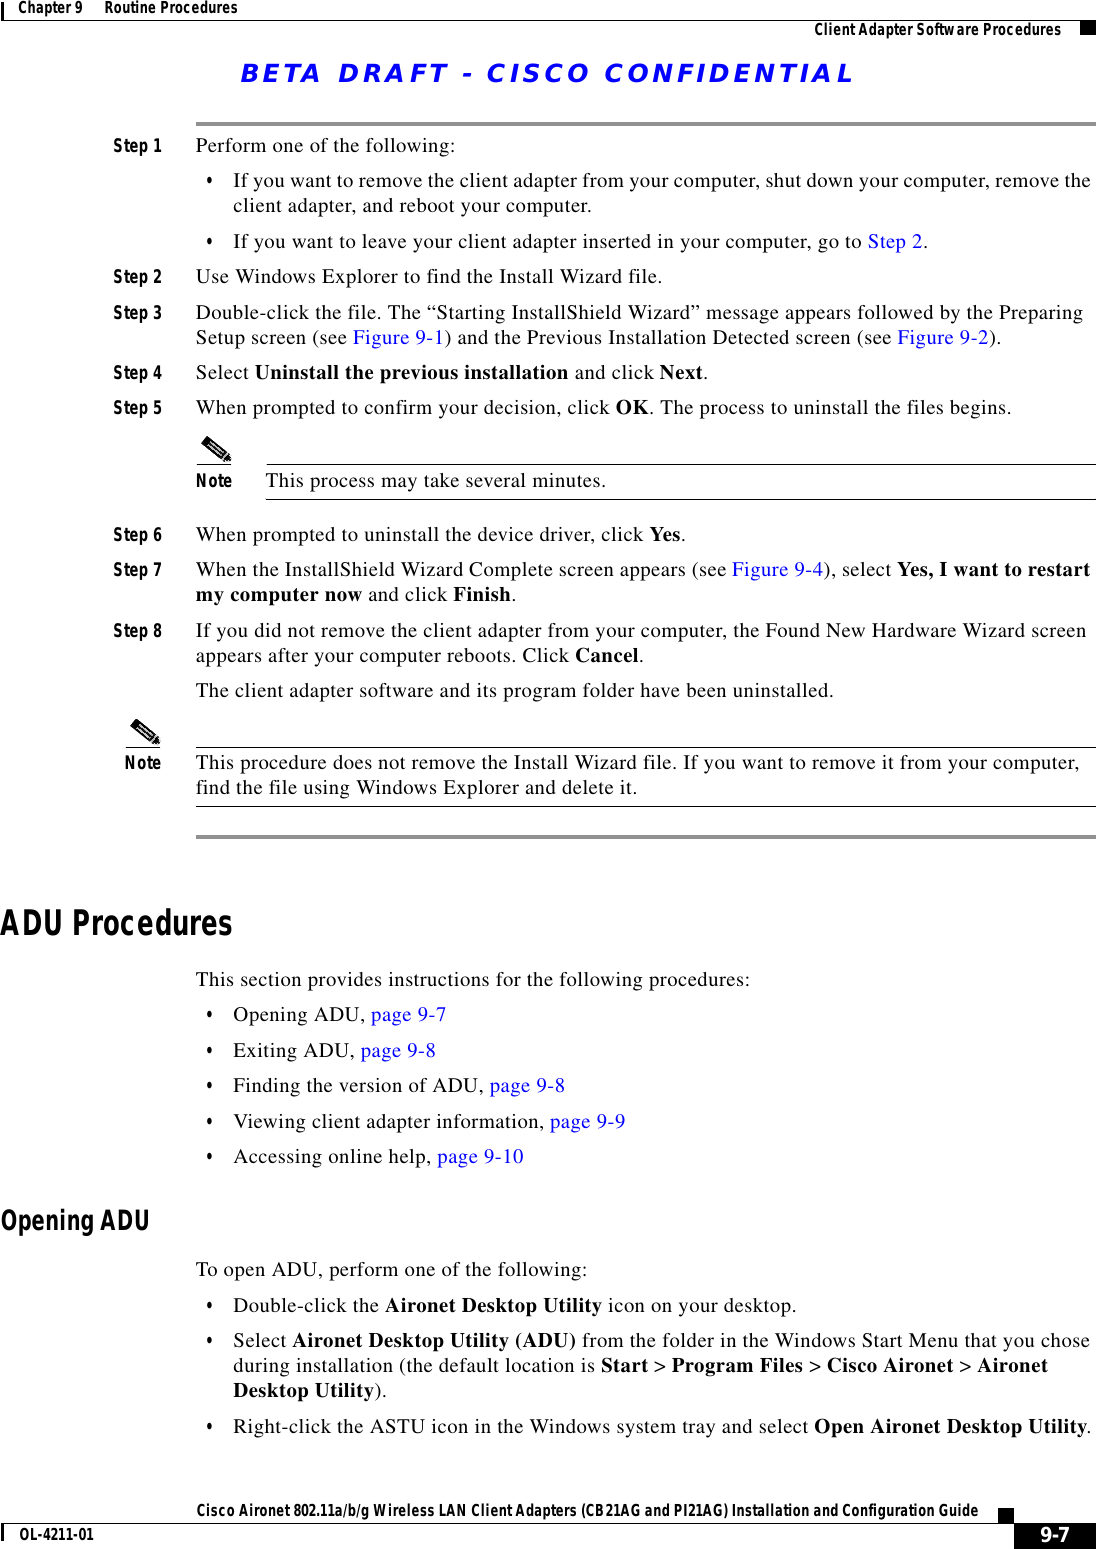 BETA DRAFT - CISCO CONFIDENTIAL9-7Cisco Aironet 802.11a/b/g Wireless LAN Client Adapters (CB21AG and PI21AG) Installation and Configuration GuideOL-4211-01Chapter 9      Routine Procedures Client Adapter Software ProceduresStep 1 Perform one of the following:•If you want to remove the client adapter from your computer, shut down your computer, remove the client adapter, and reboot your computer.•If you want to leave your client adapter inserted in your computer, go to Step 2.Step 2 Use Windows Explorer to find the Install Wizard file. Step 3 Double-click the file. The “Starting InstallShield Wizard” message appears followed by the Preparing Setup screen (see Figure 9-1) and the Previous Installation Detected screen (see Figure 9-2).Step 4 Select Uninstall the previous installation and click Next.Step 5 When prompted to confirm your decision, click OK. The process to uninstall the files begins.Note This process may take several minutes.Step 6 When prompted to uninstall the device driver, click Yes.Step 7 When the InstallShield Wizard Complete screen appears (see Figure 9-4), select Yes, I want to restart my computer now and click Finish.Step 8 If you did not remove the client adapter from your computer, the Found New Hardware Wizard screen appears after your computer reboots. Click Cancel.The client adapter software and its program folder have been uninstalled.Note This procedure does not remove the Install Wizard file. If you want to remove it from your computer, find the file using Windows Explorer and delete it.ADU ProceduresThis section provides instructions for the following procedures:•Opening ADU, page 9-7•Exiting ADU, page 9-8•Finding the version of ADU, page 9-8•Viewing client adapter information, page 9-9•Accessing online help, page 9-10Opening ADUTo open ADU, perform one of the following:•Double-click the Aironet Desktop Utility icon on your desktop.•Select Aironet Desktop Utility (ADU) from the folder in the Windows Start Menu that you chose during installation (the default location is Start &gt; Program Files &gt; Cisco Aironet &gt; Aironet Desktop Utility).•Right-click the ASTU icon in the Windows system tray and select Open Aironet Desktop Utility.